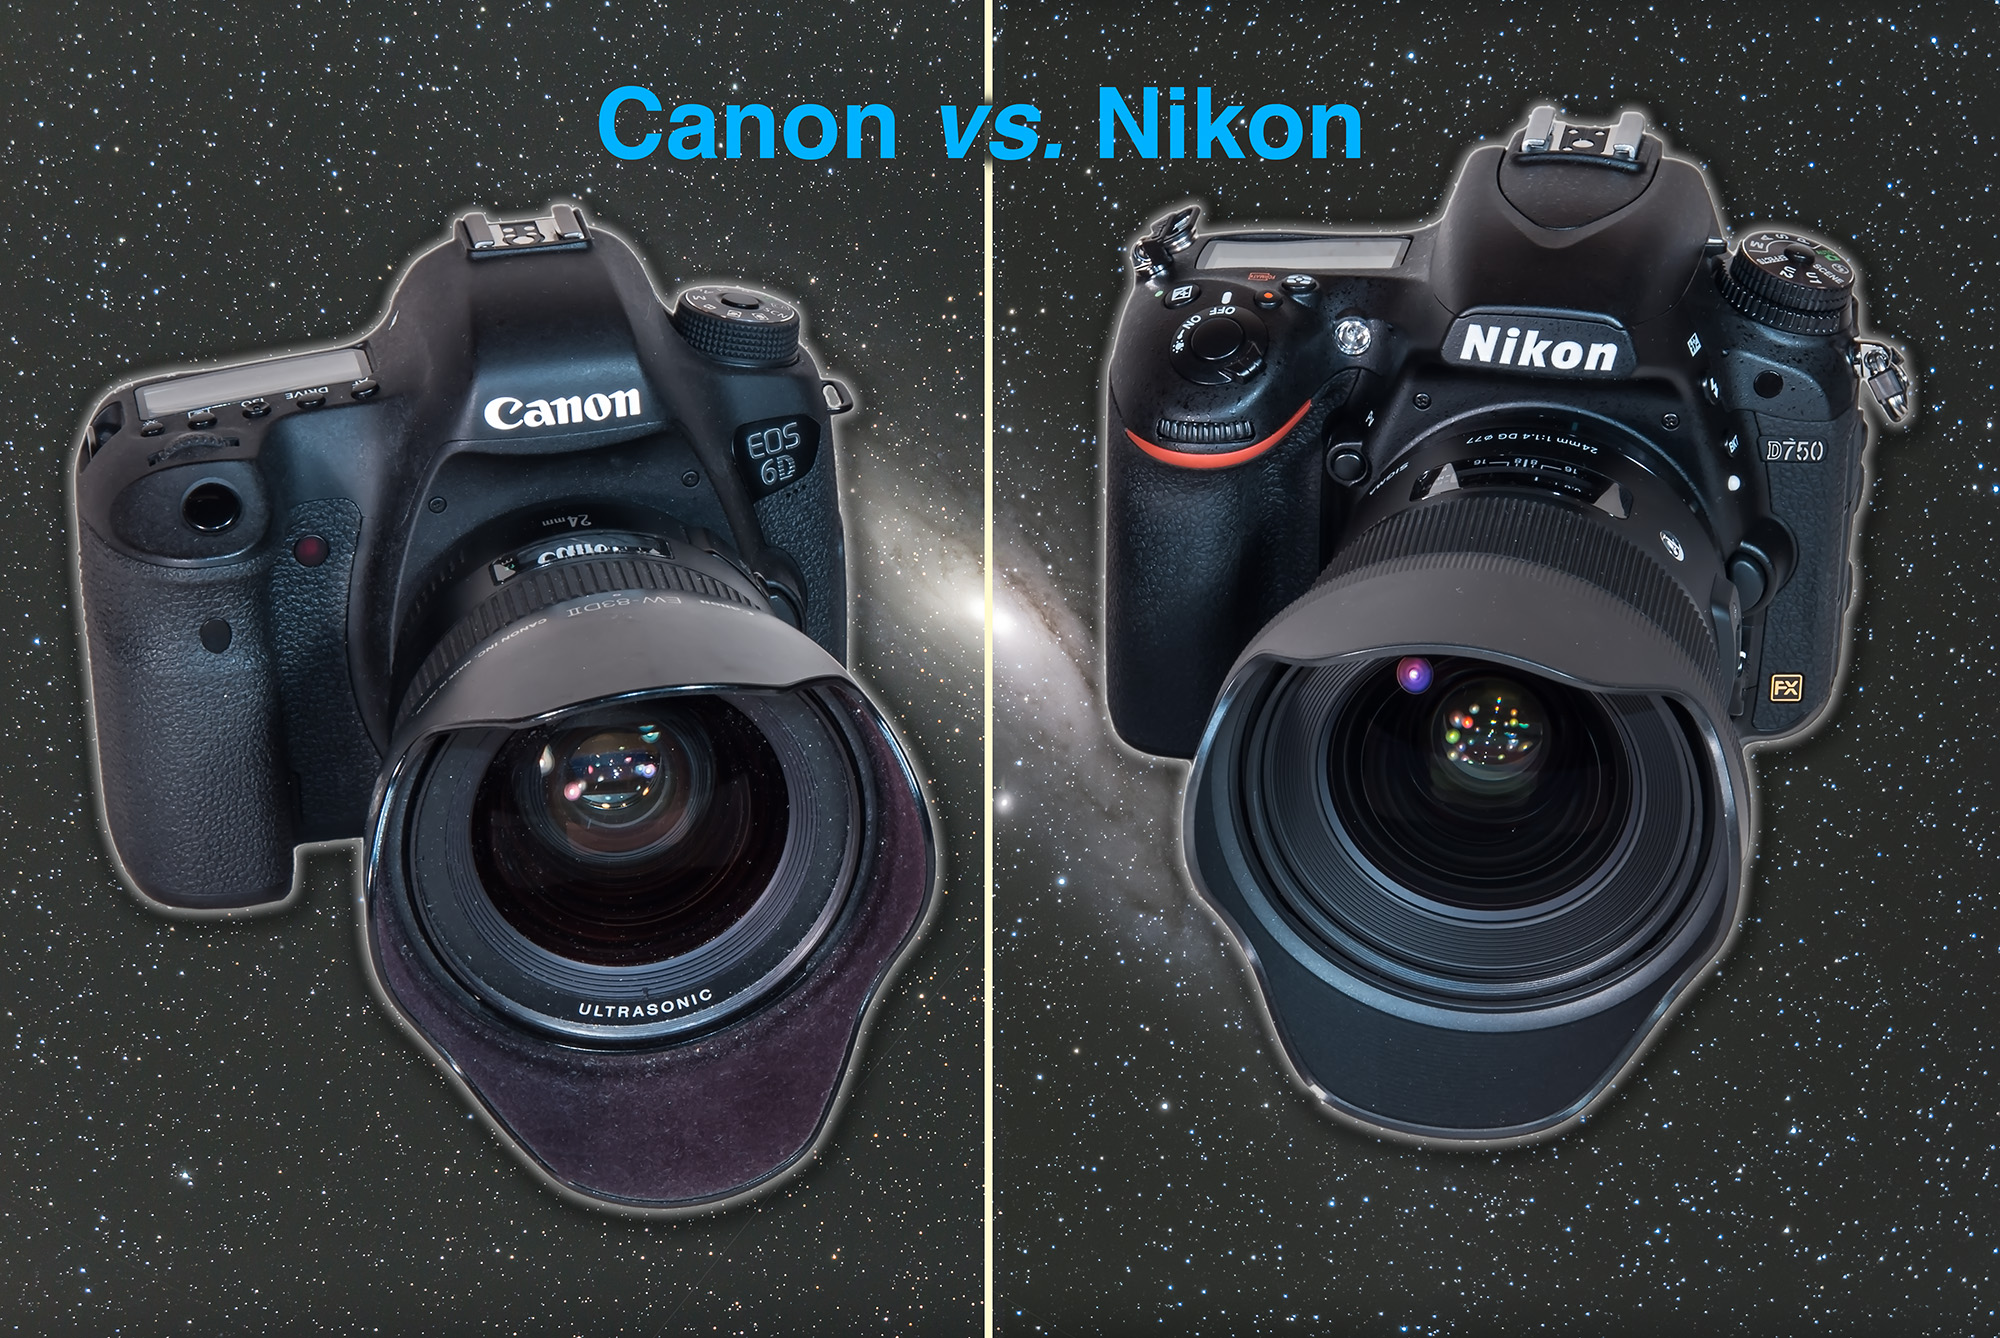 Comparative images of Canon and Nikon cameras